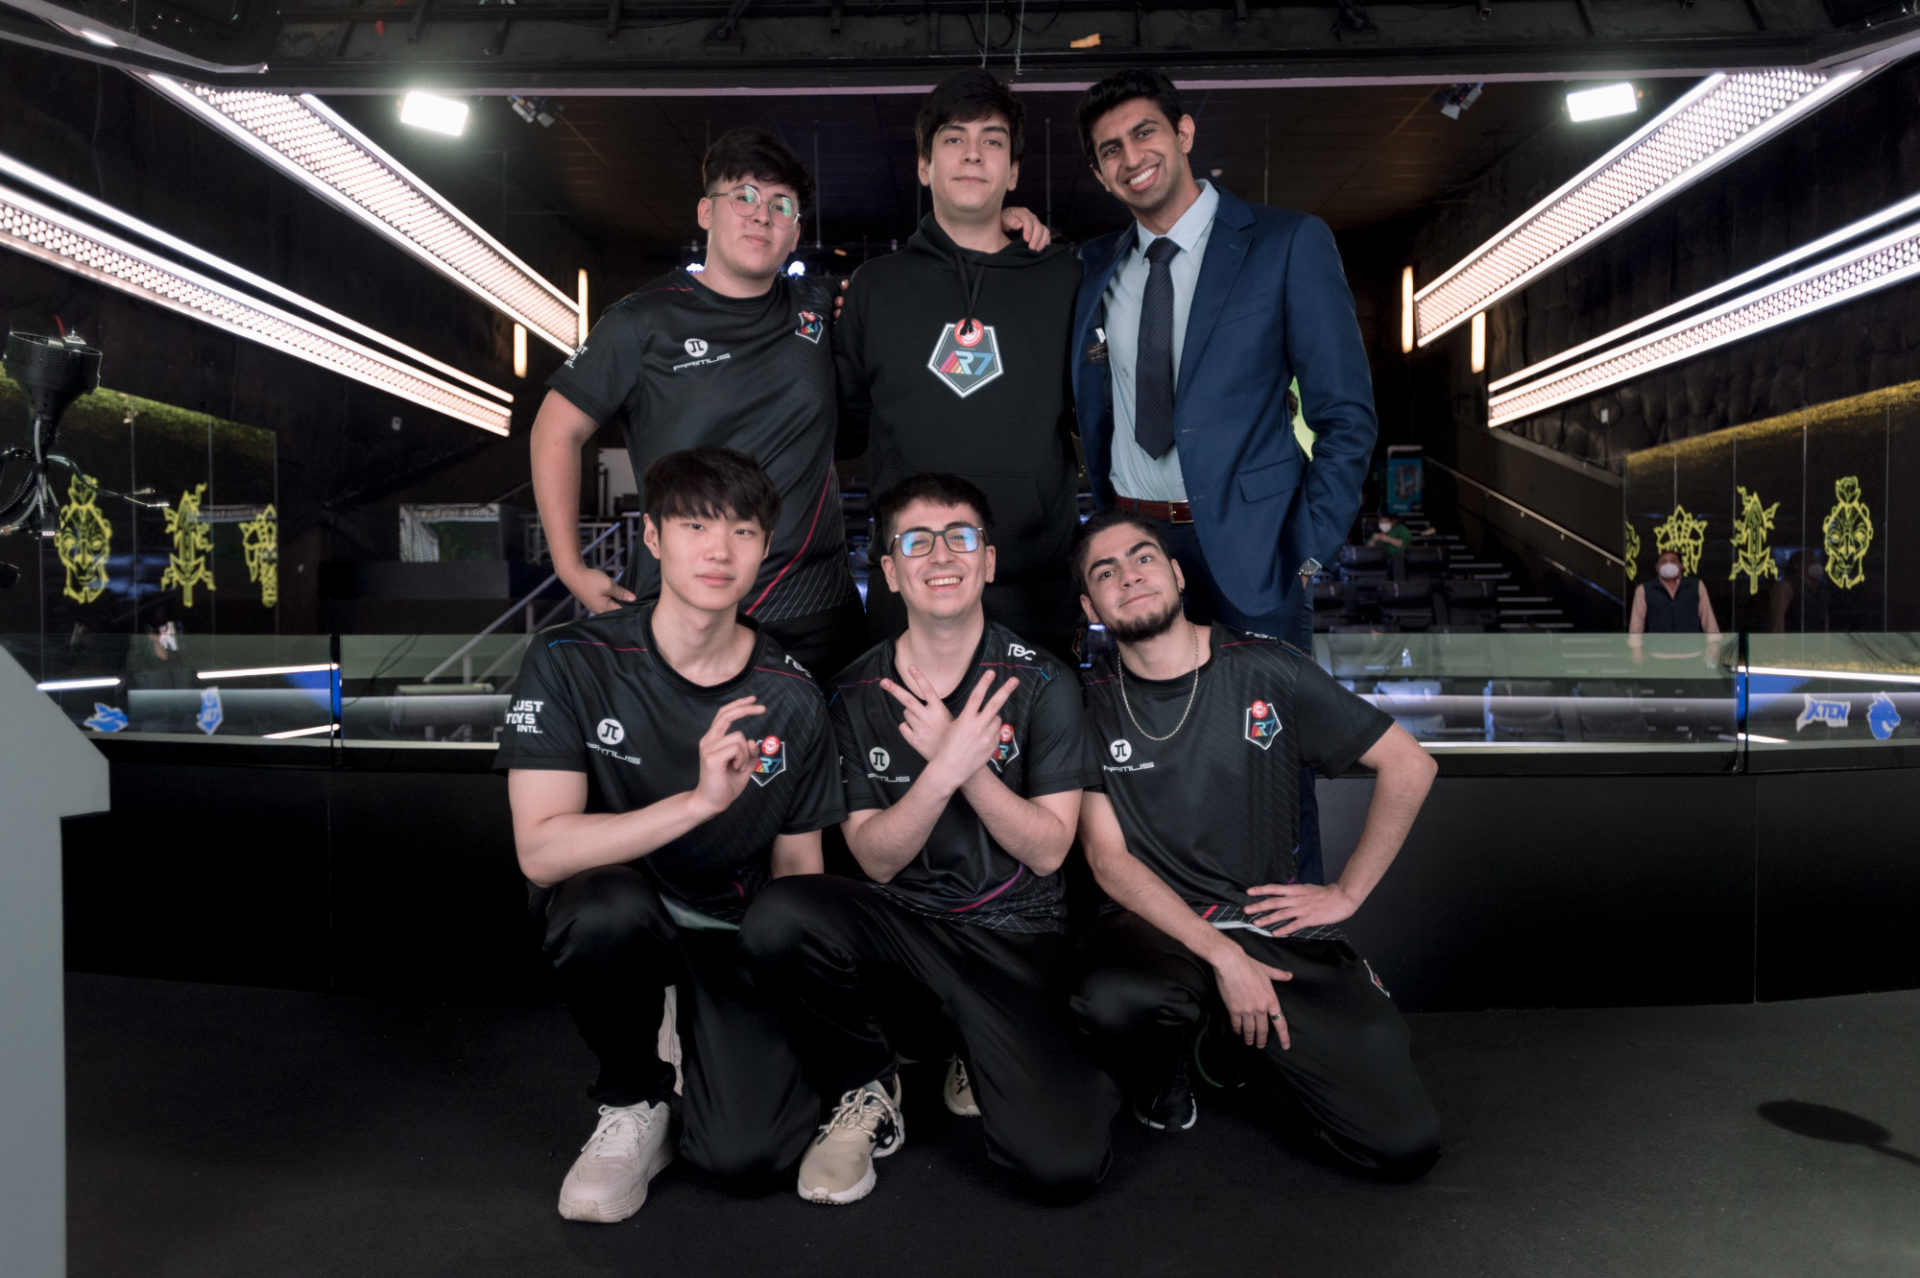 League of Legends: the LLA playoffs are already defined - matches, dates and times